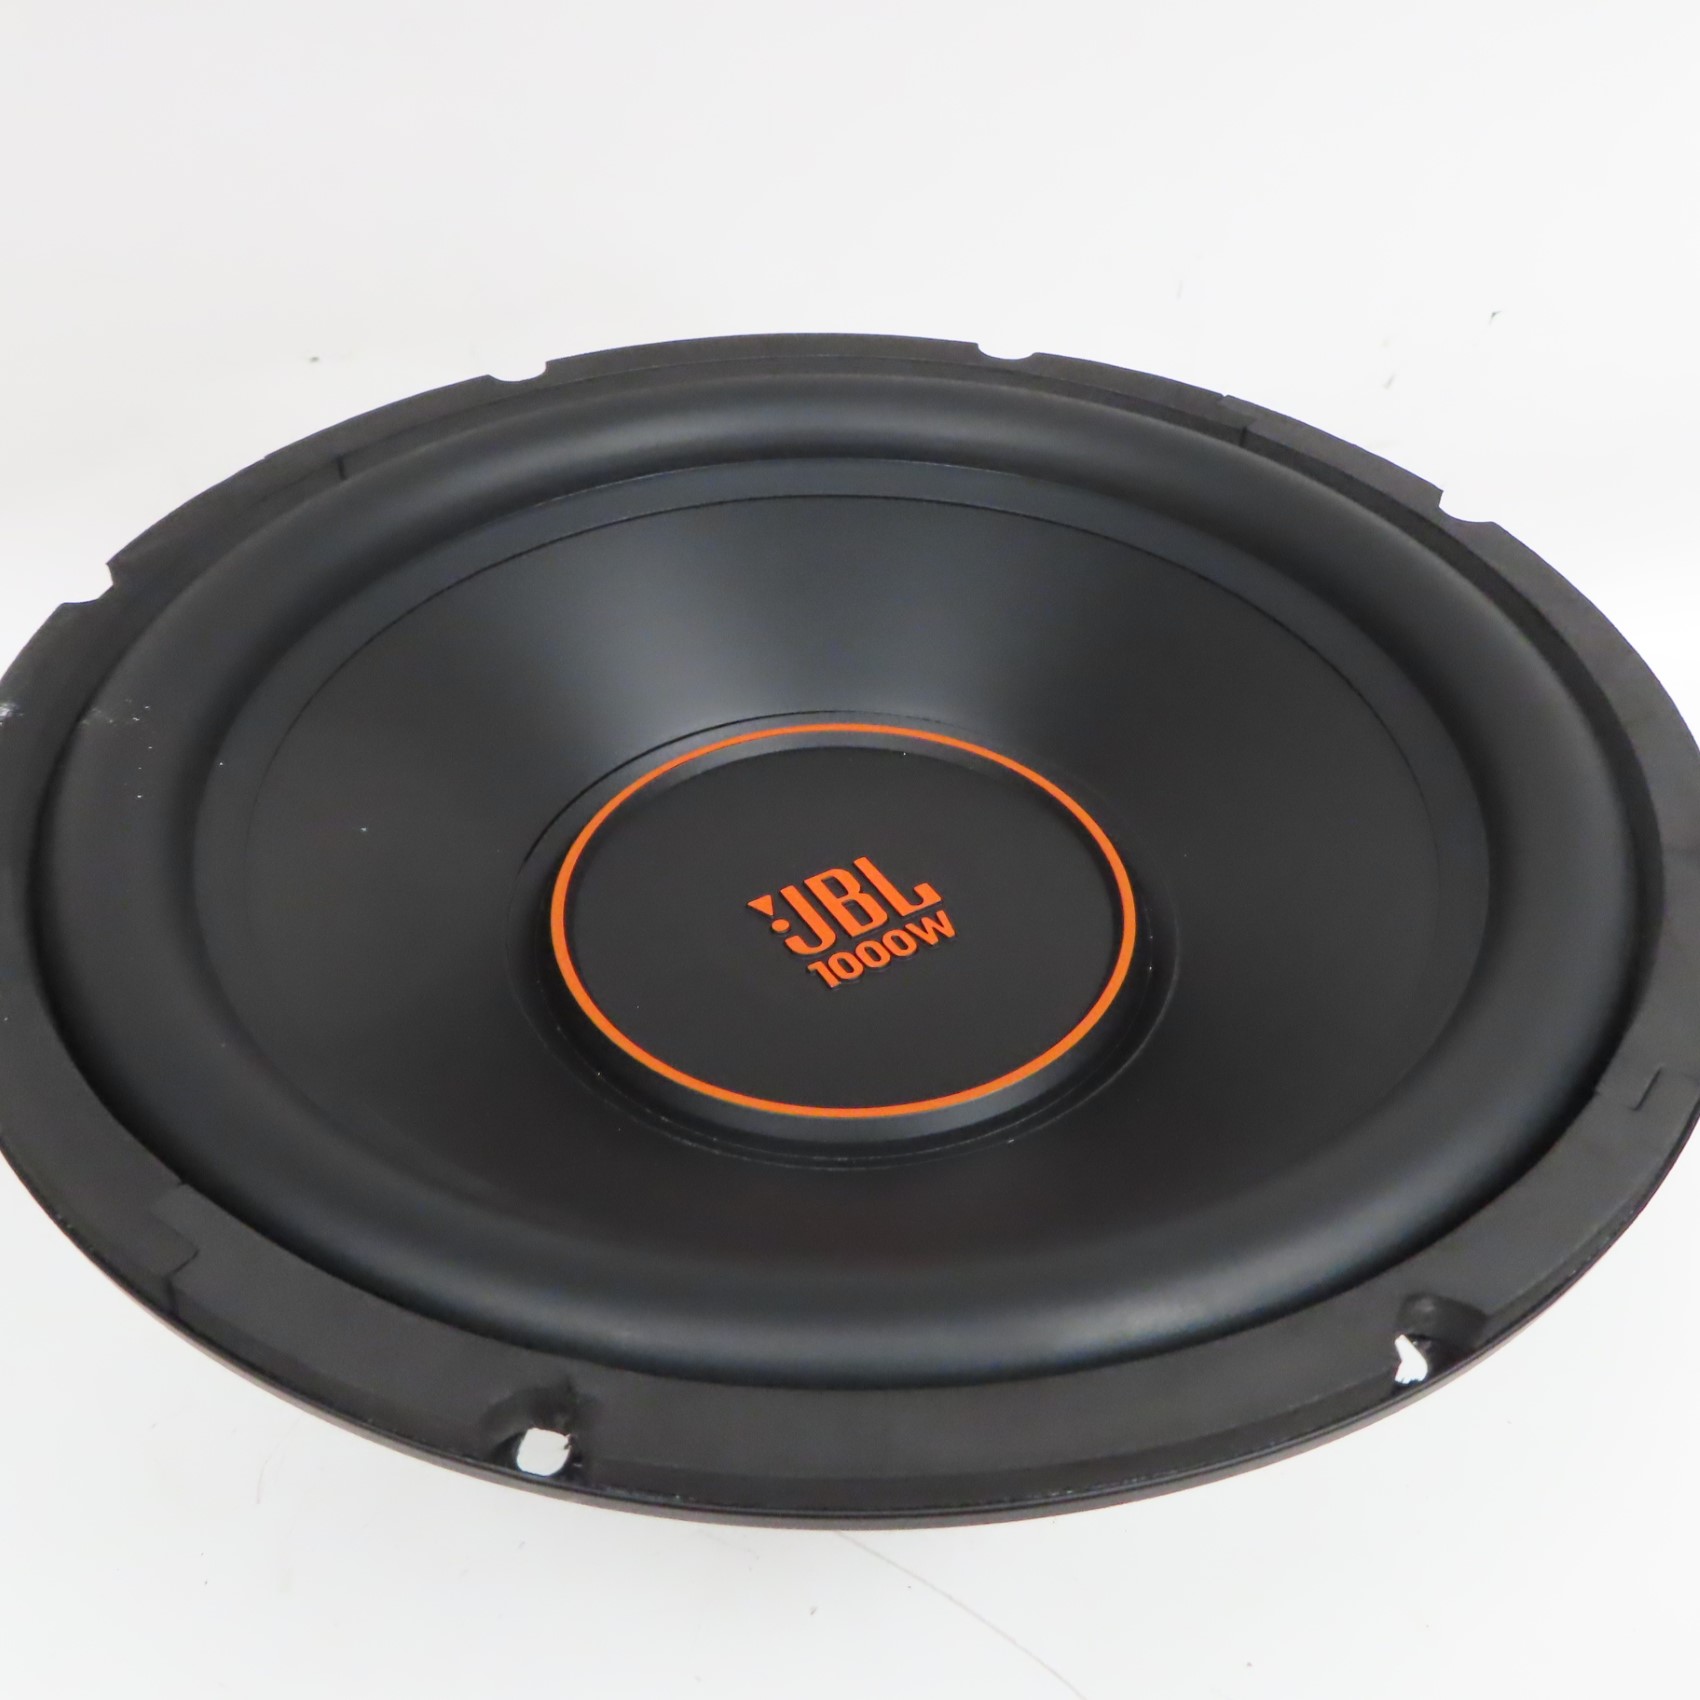 JBL GX1200 GX Series 250W RMS 12 Car Audio Subwoofer (Local Pick-Up Only)